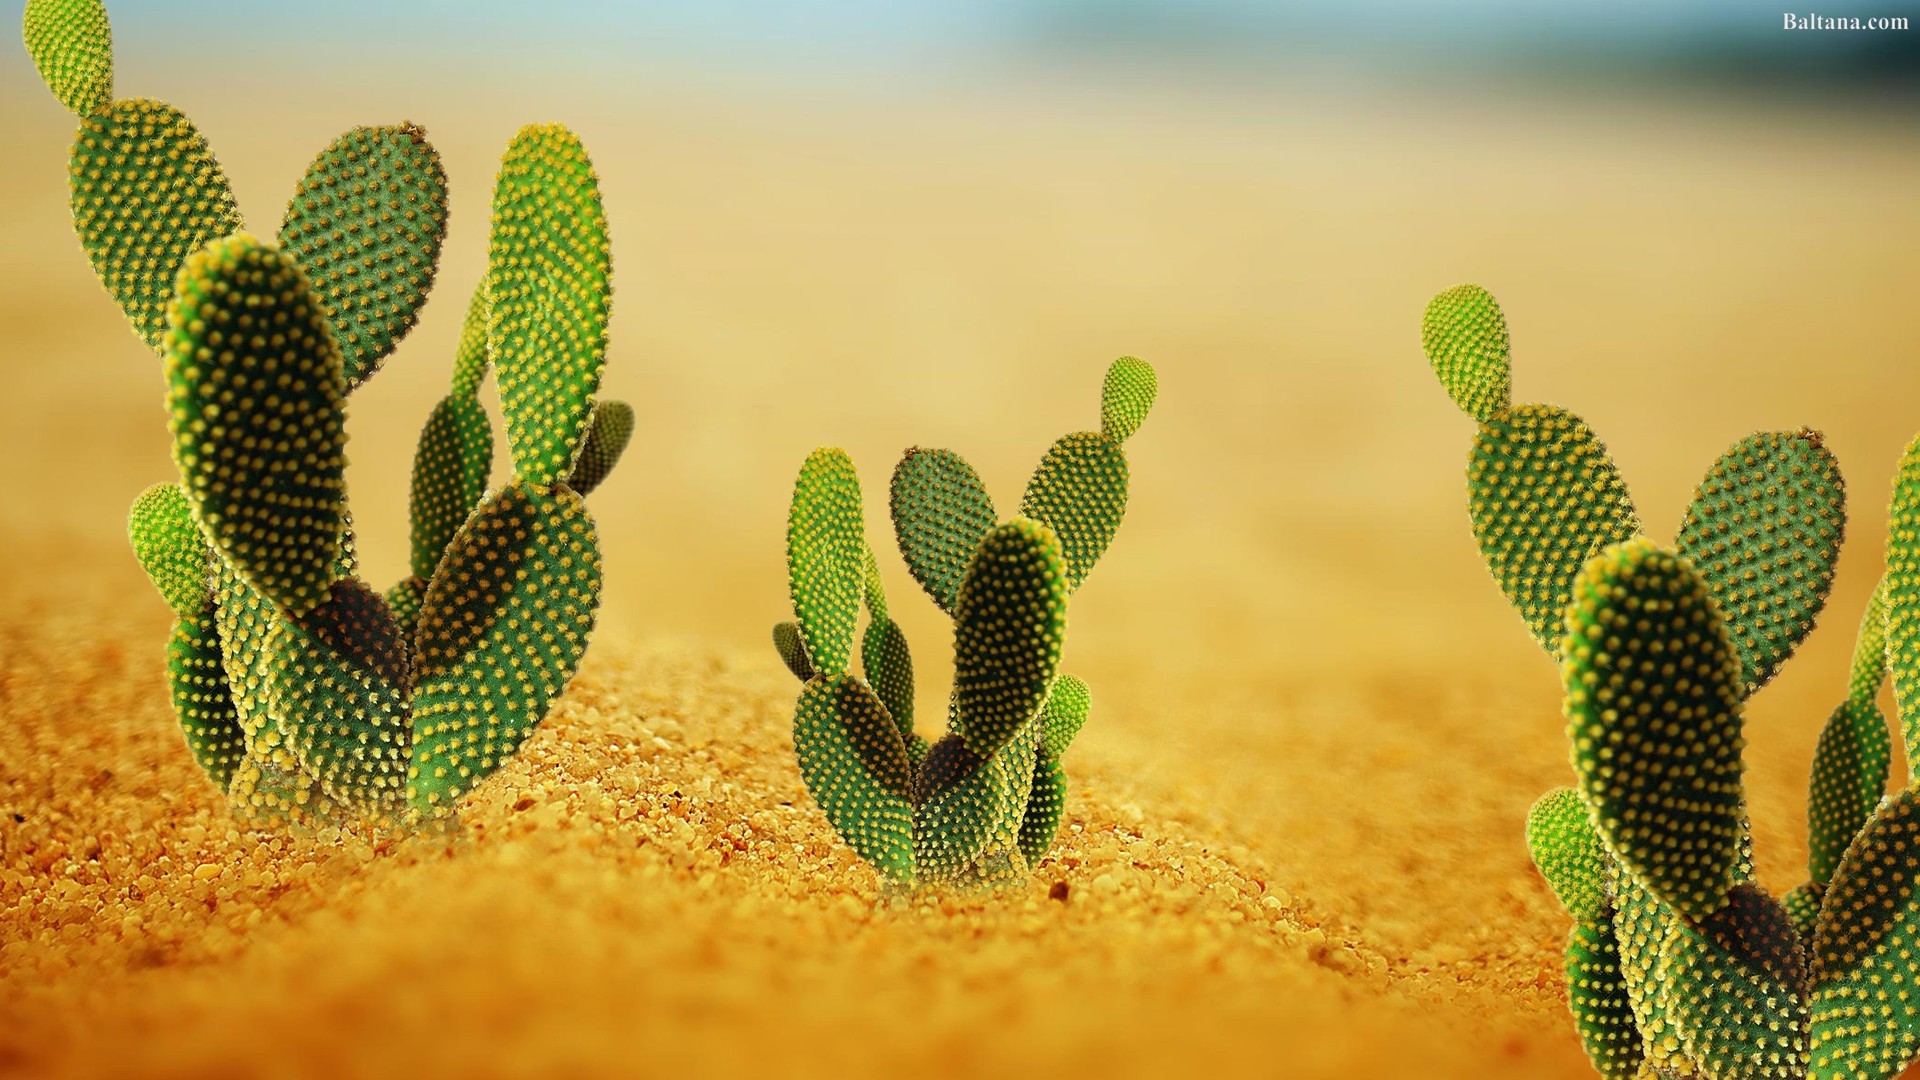 10 Incomparable cactus flower desktop wallpaper You Can Get It Without ...